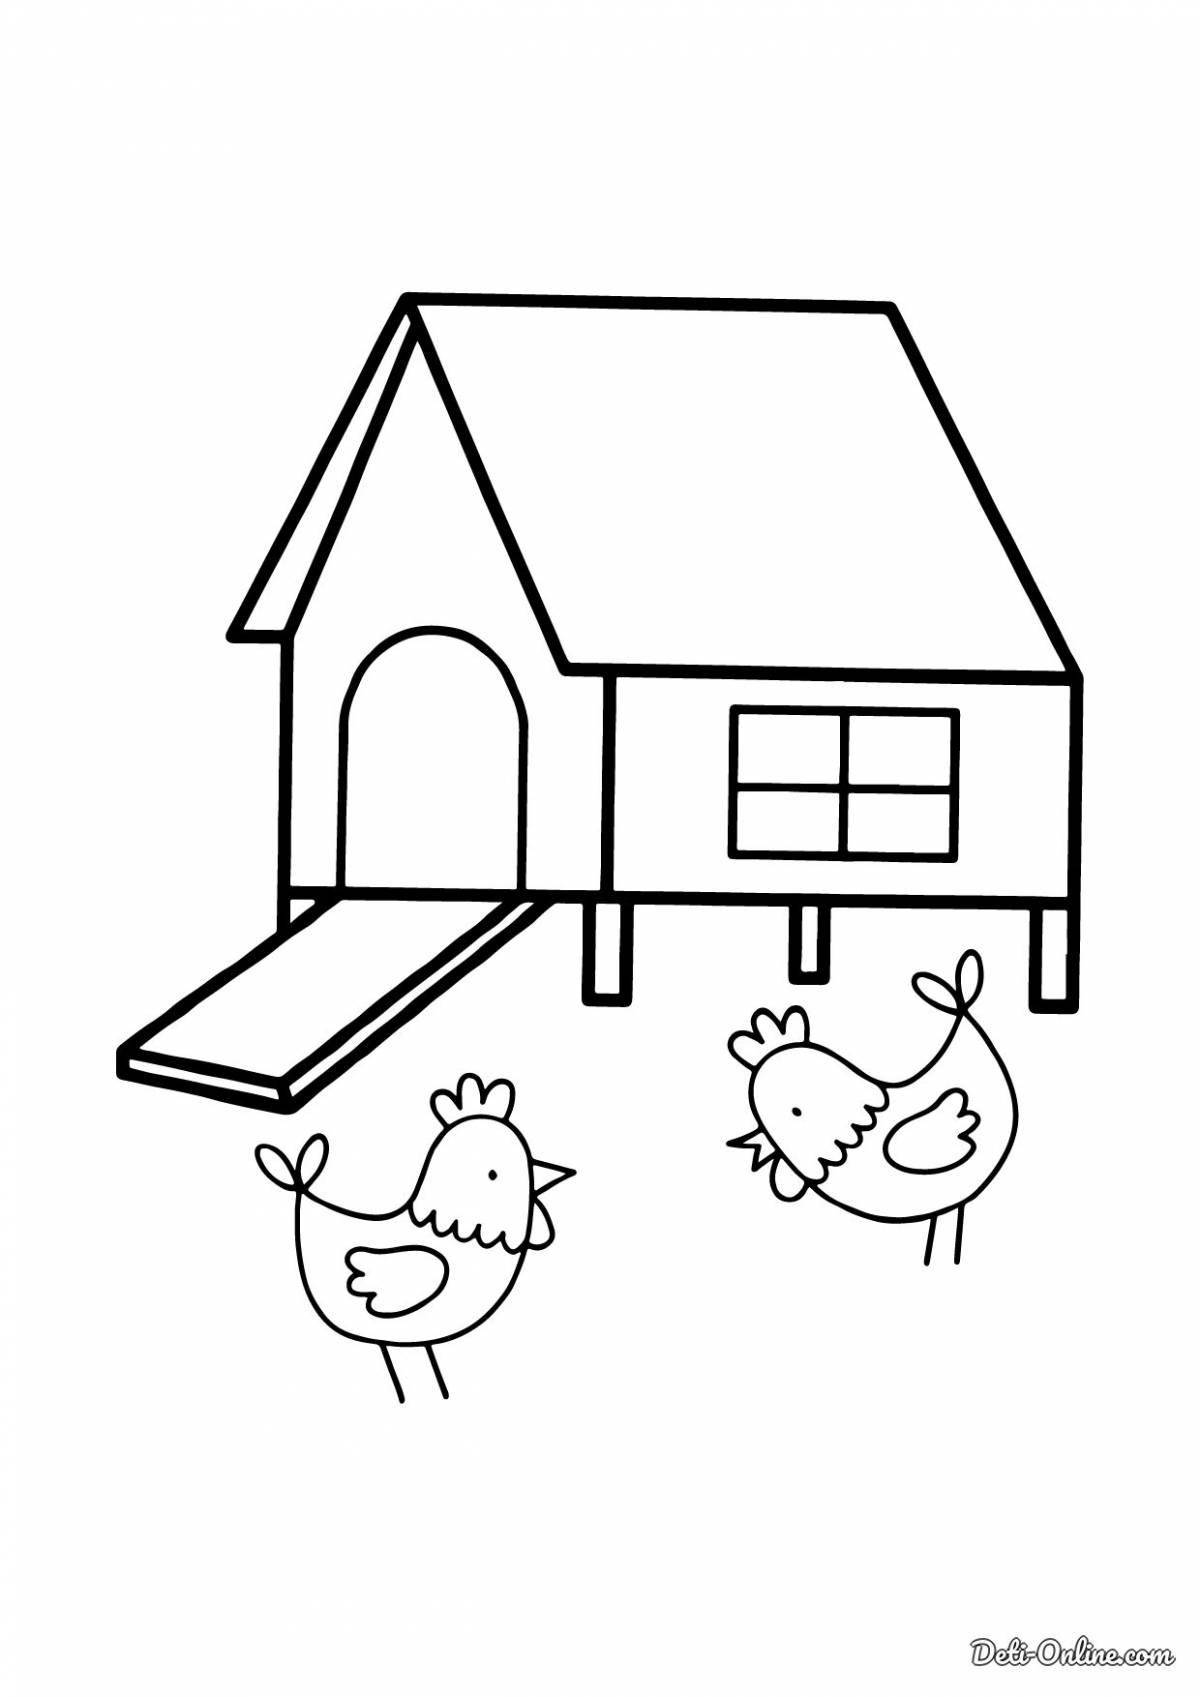 Grand Chicken Coop Coloring Page for Toddlers